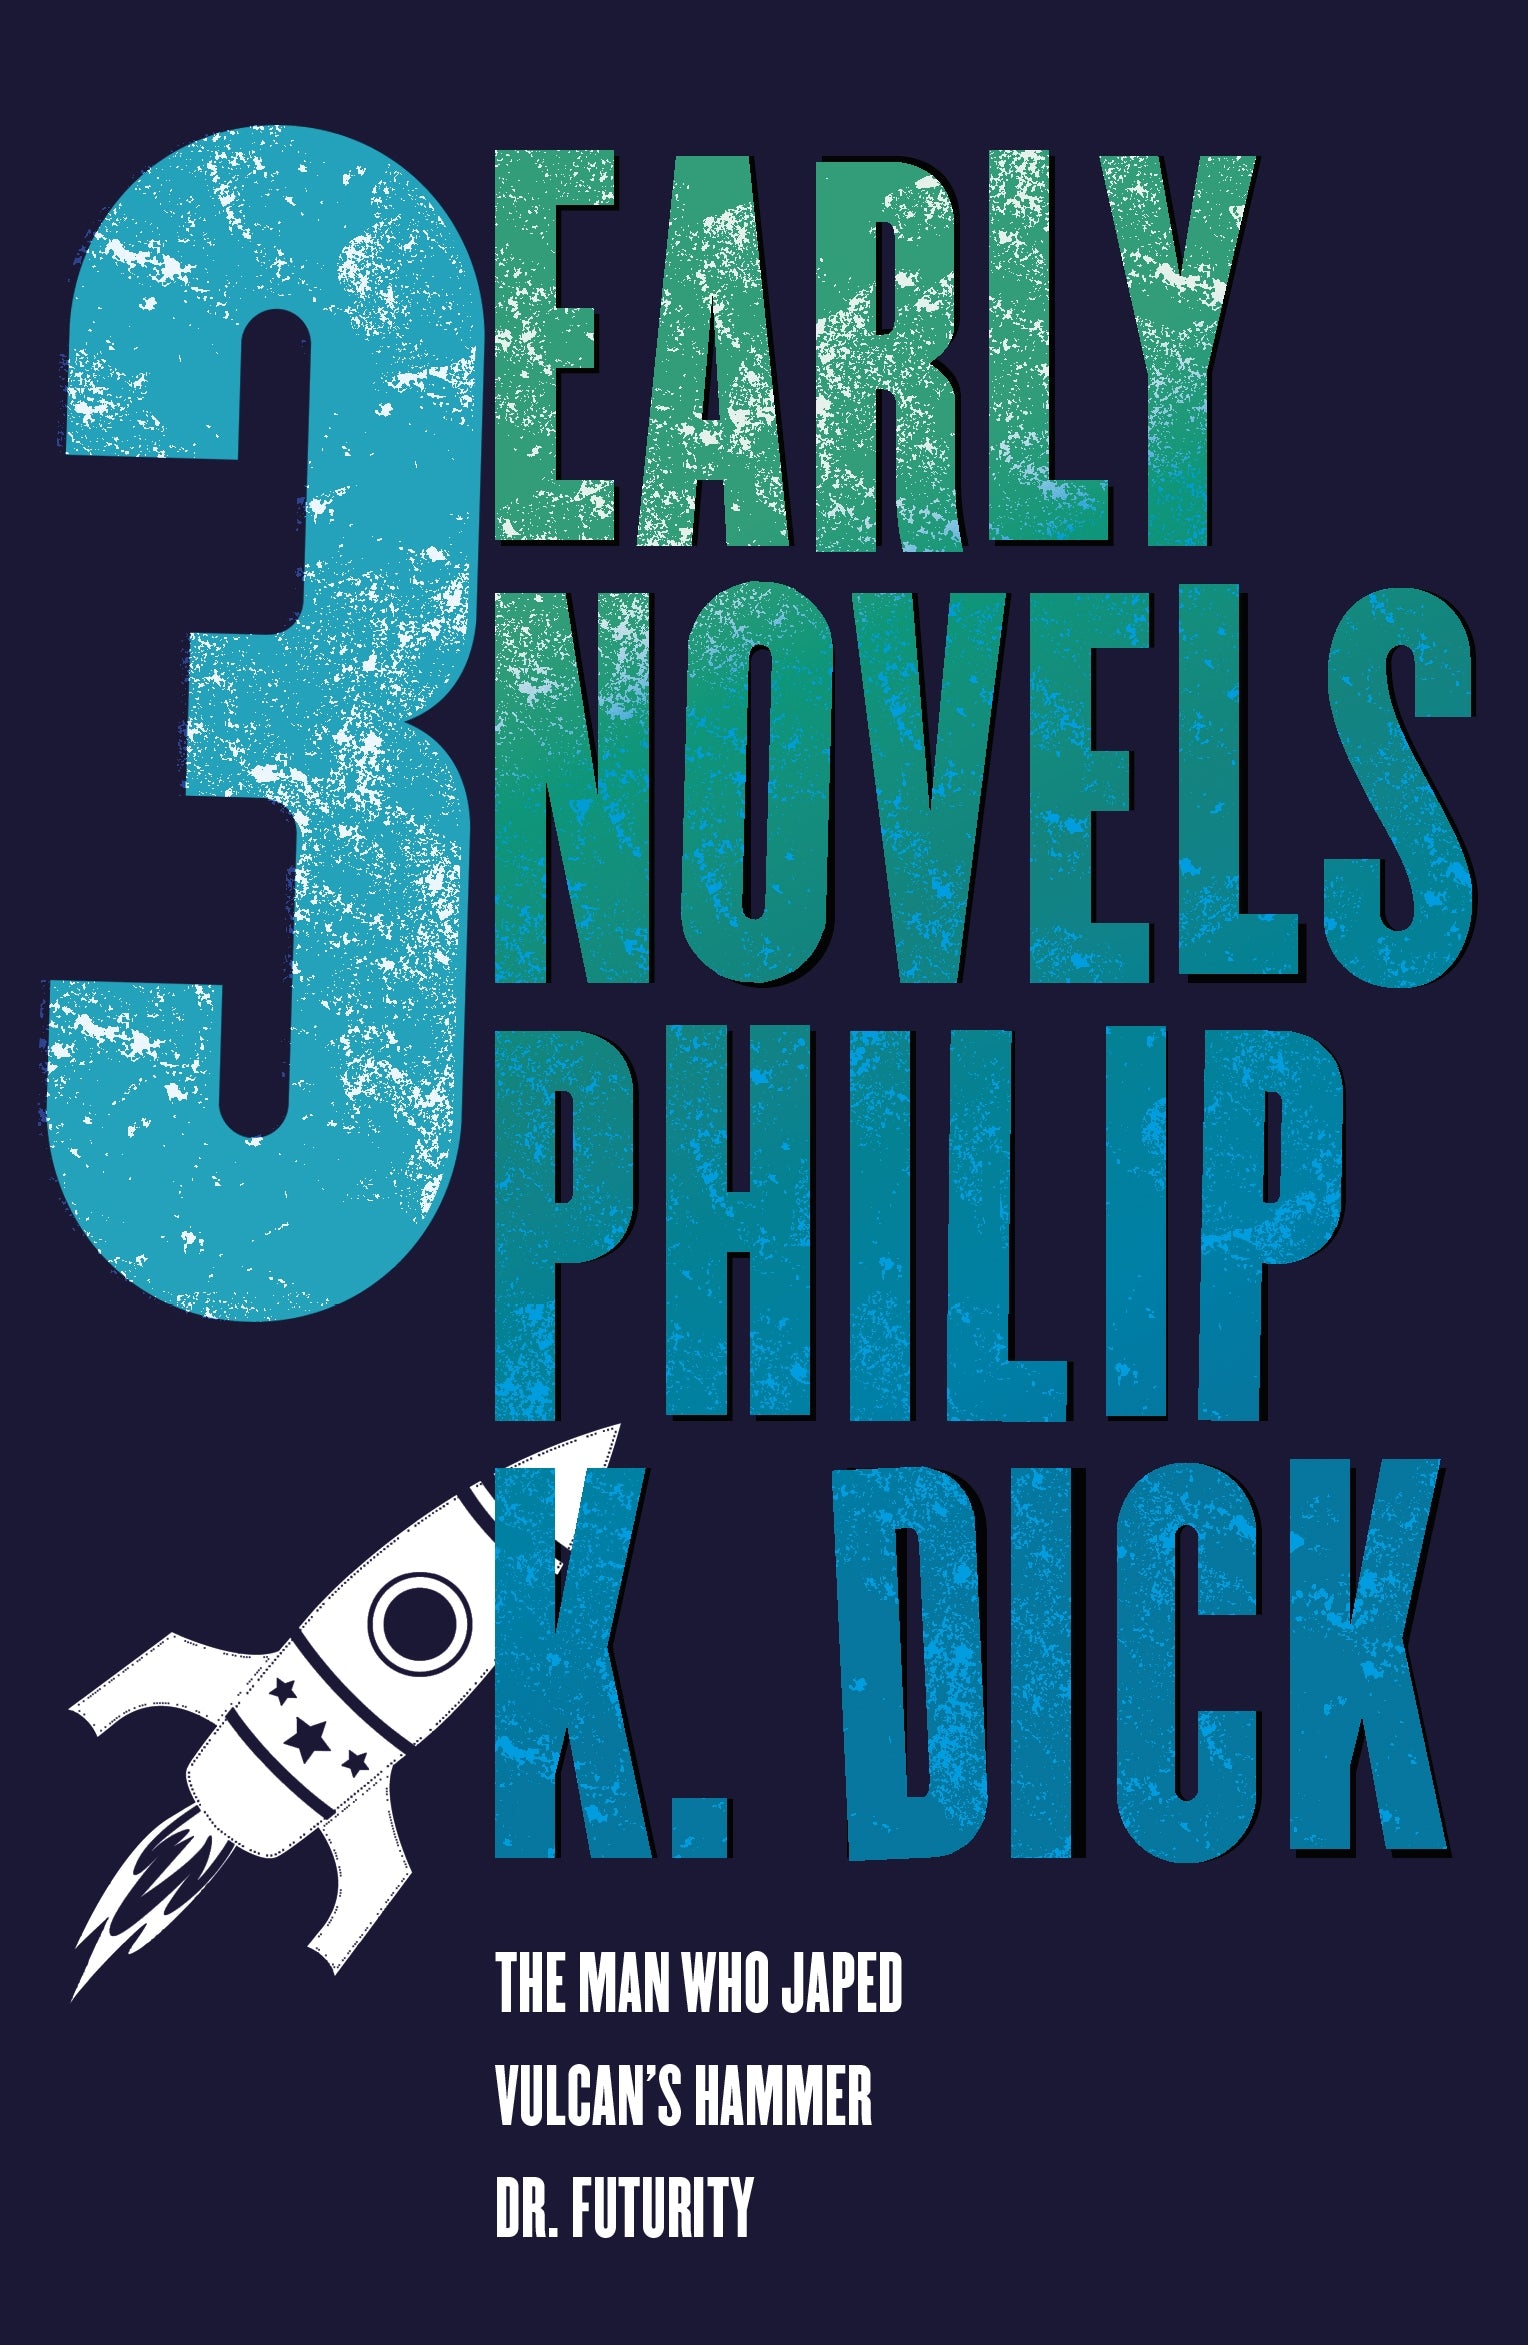 Three Early Novels by Philip K Dick